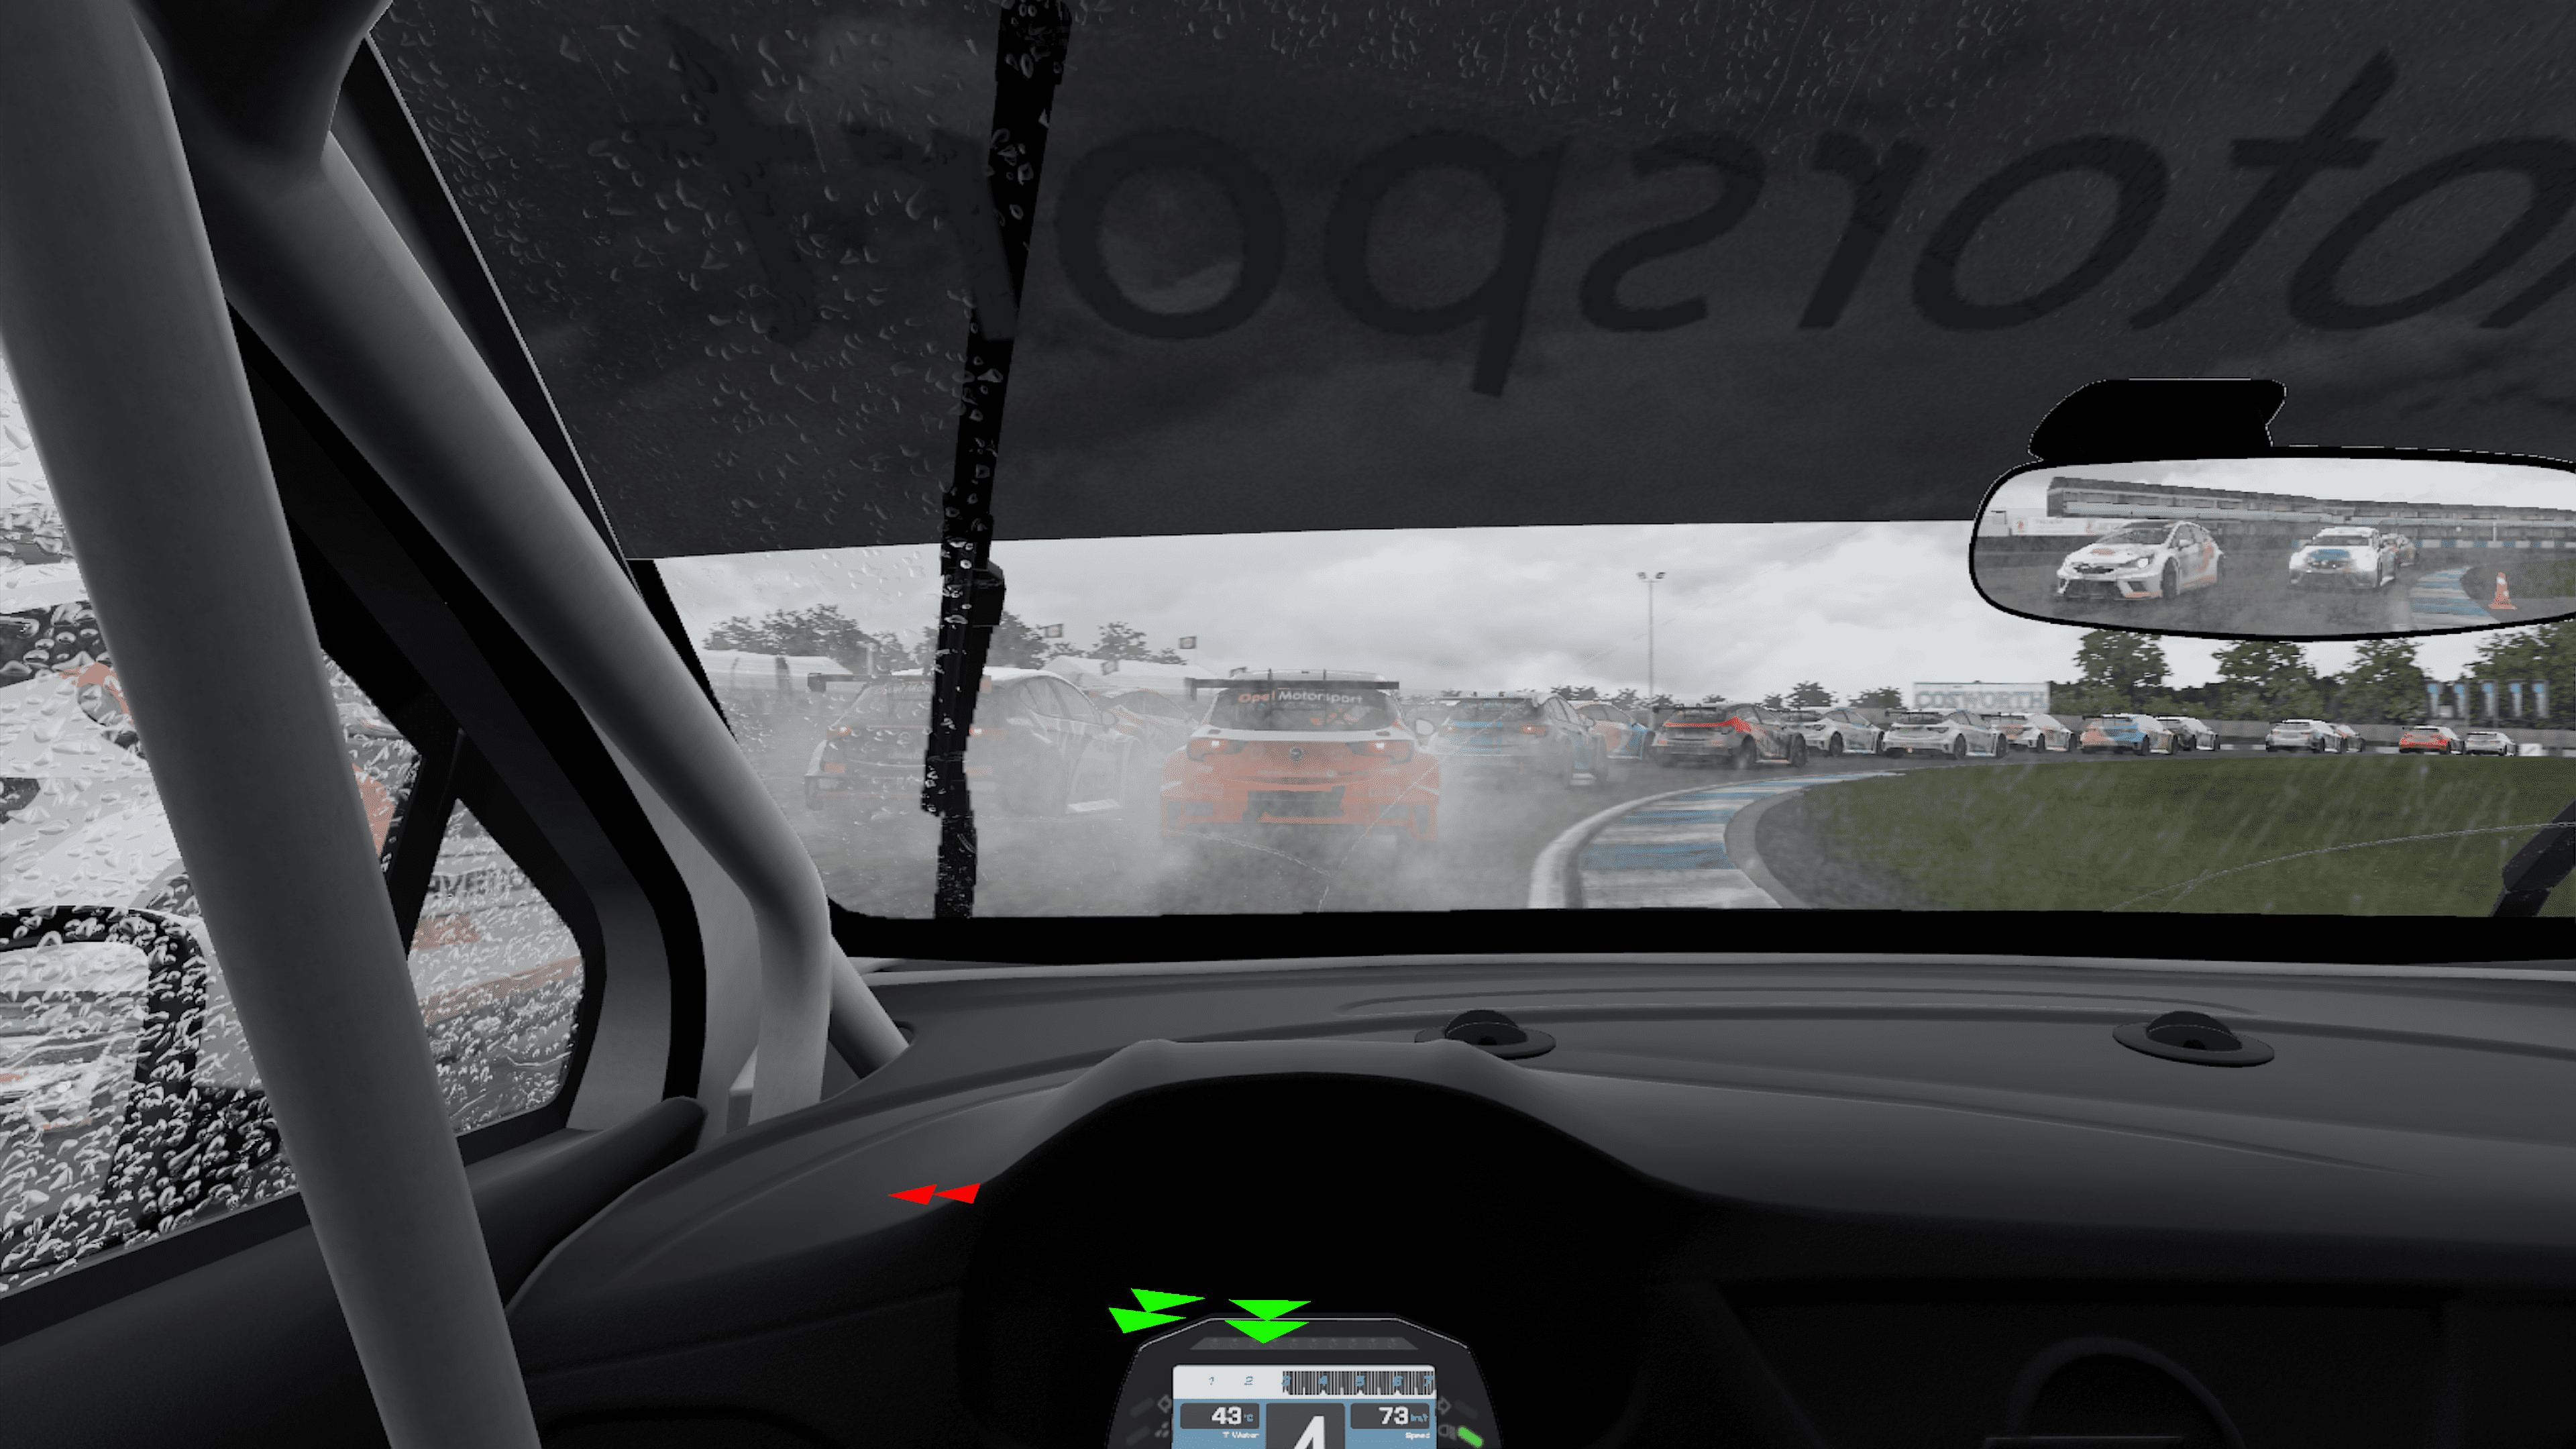 Project_CARS_2_20180303233901.png